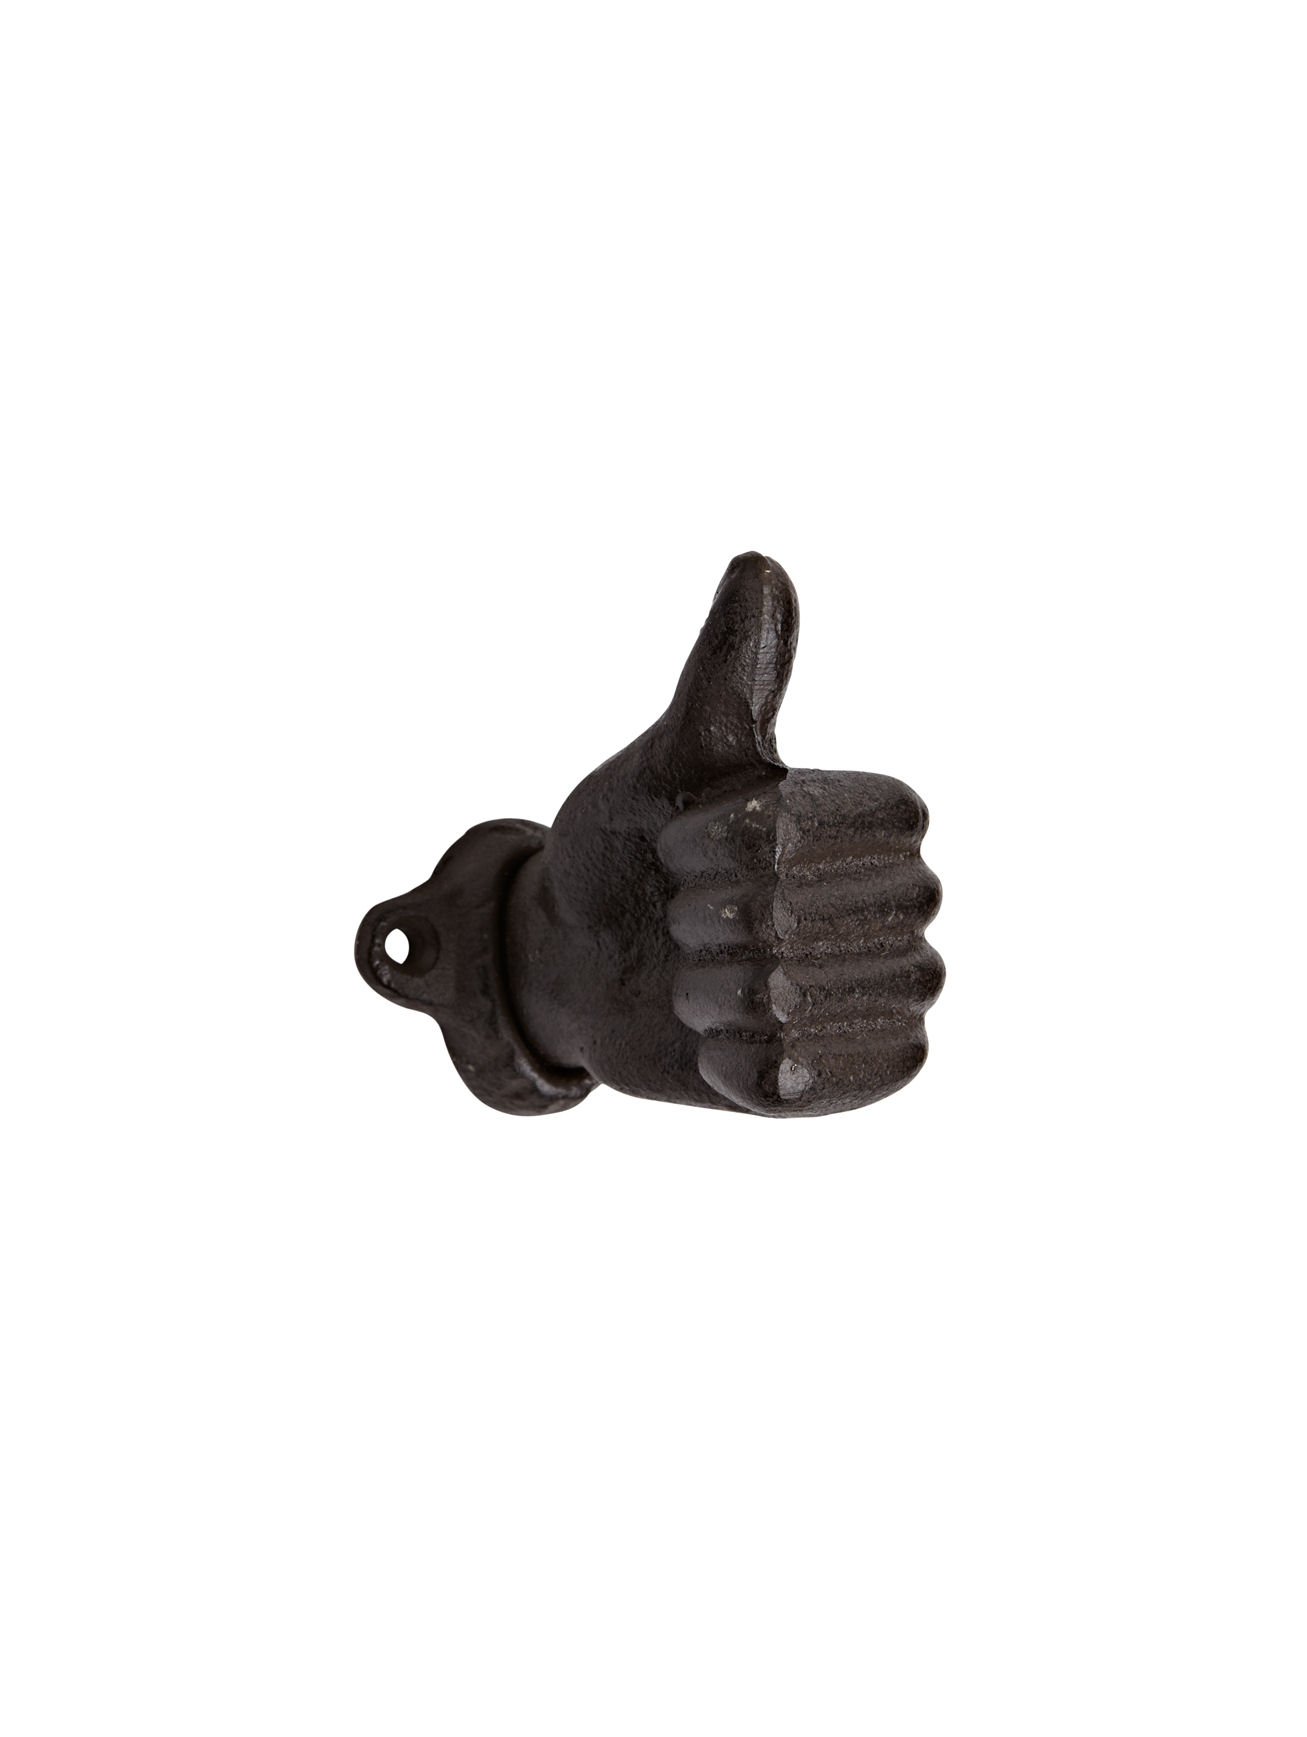 Thumbs Up Hand Wall Hook — Lost Objects, Found Treasures